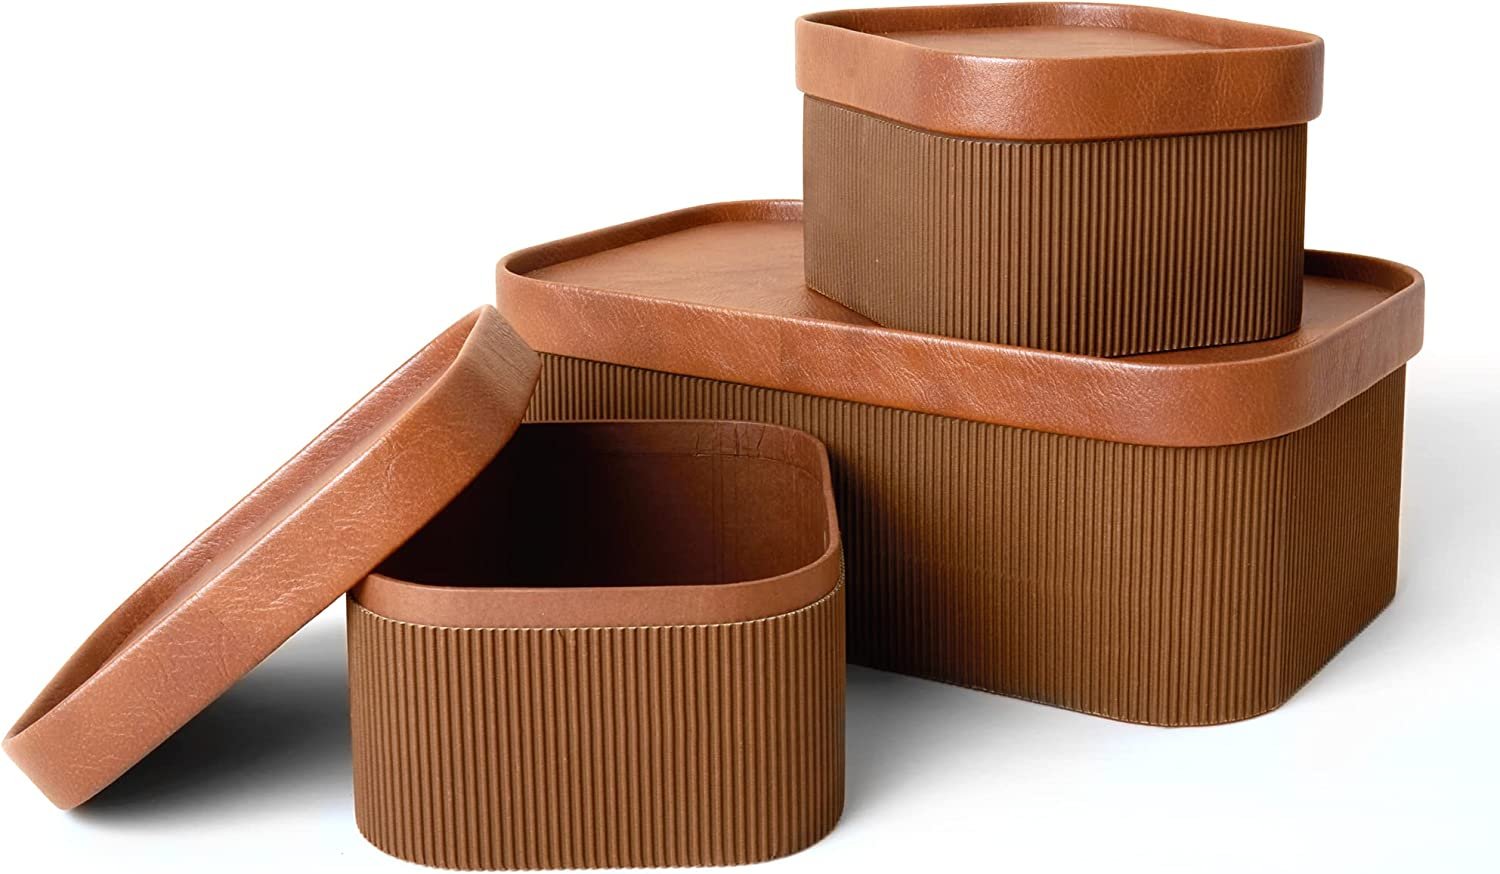 Cardboard &amp; Leather Boxes | $37